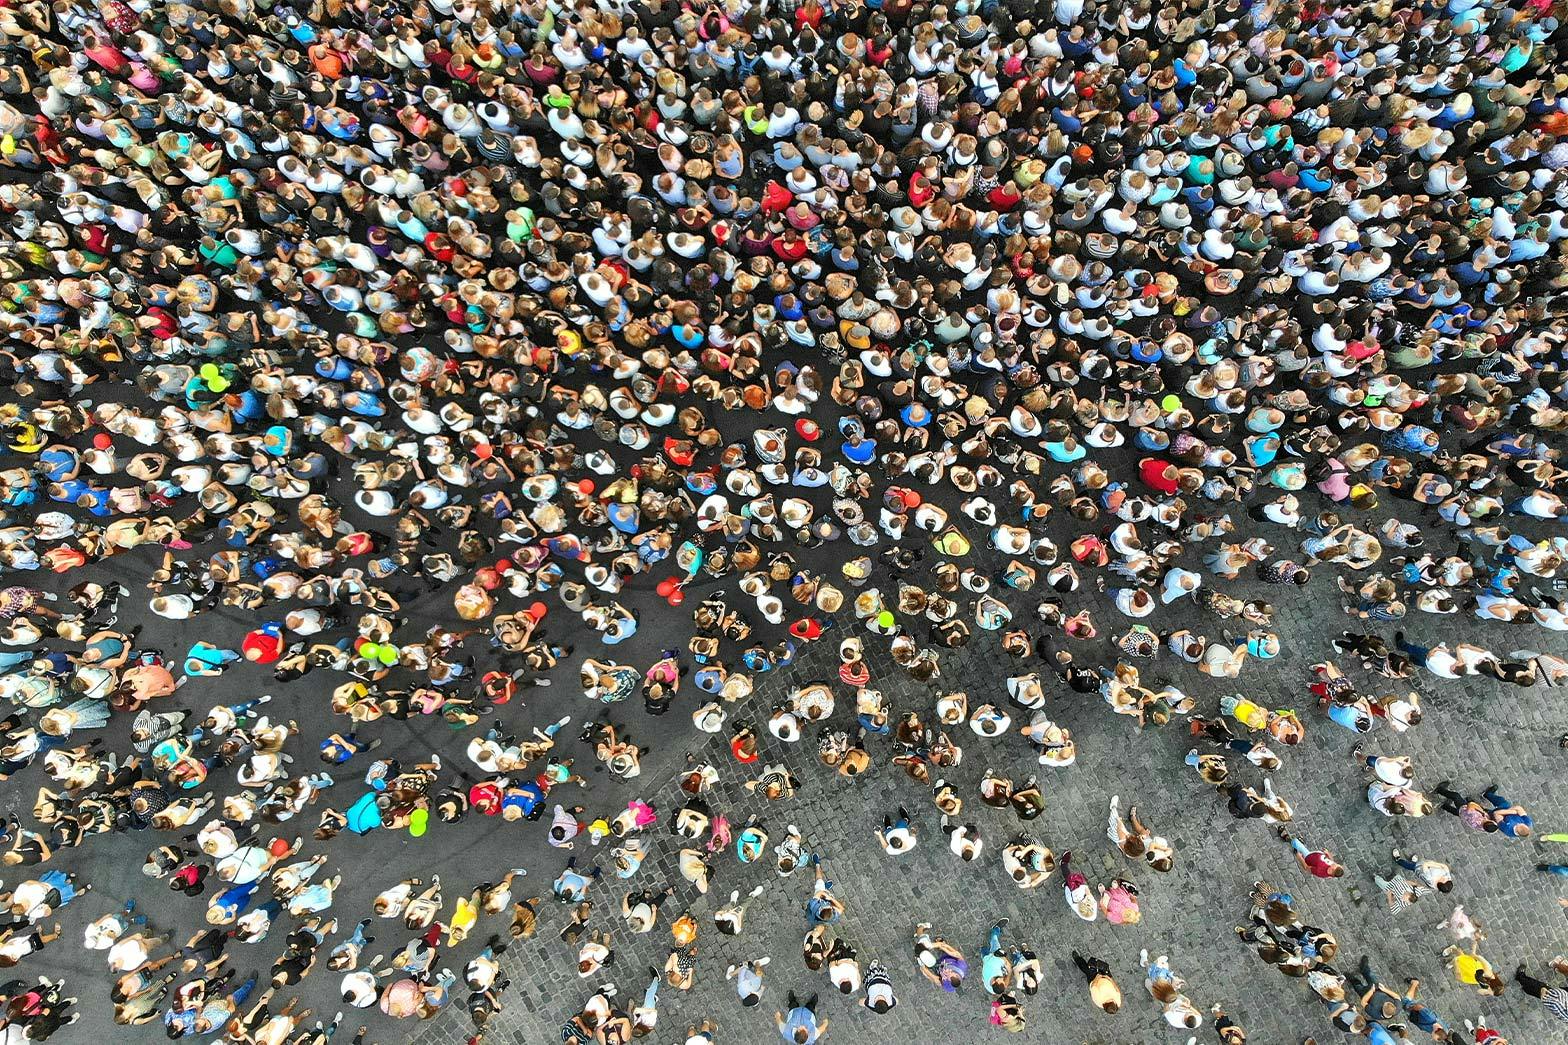 A crowd of people photographed from above